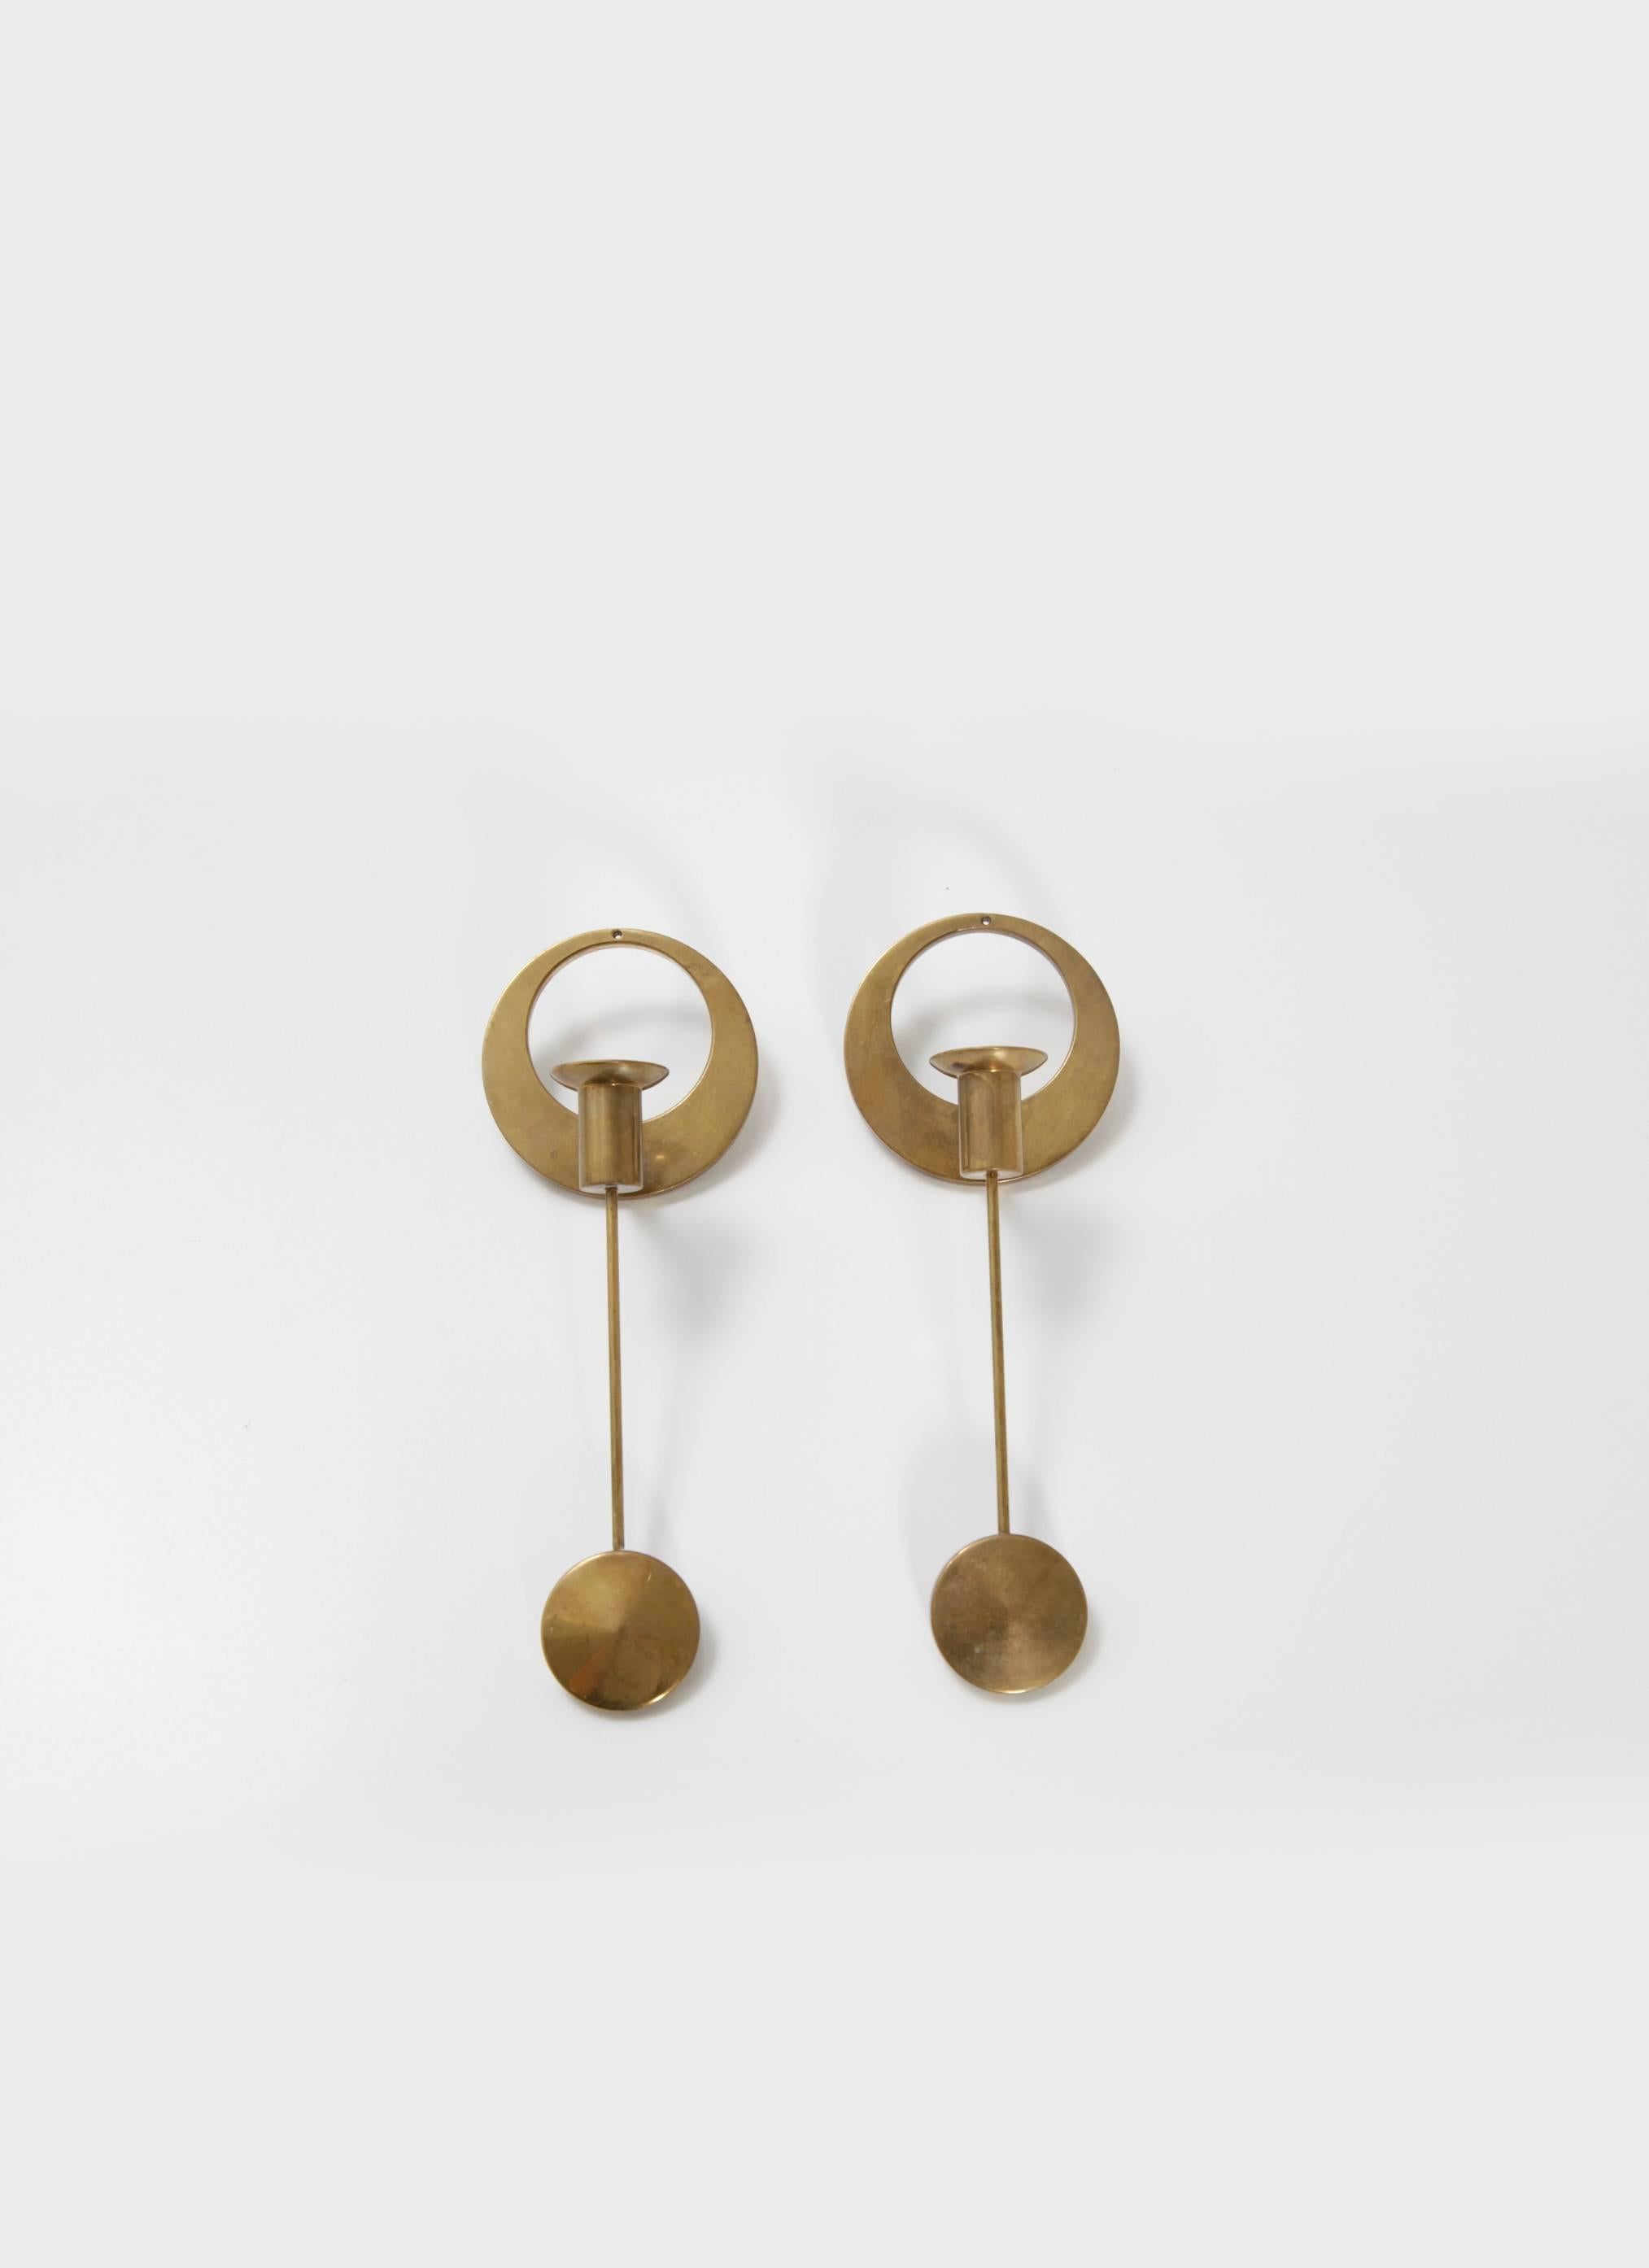 A pair of elegant Mid-Century brass wall-mounted candleholders, by Artur Pe Kolbäck. In good vintage condition with a nice natural patina. The price is for the pair.  Ships worldwide.